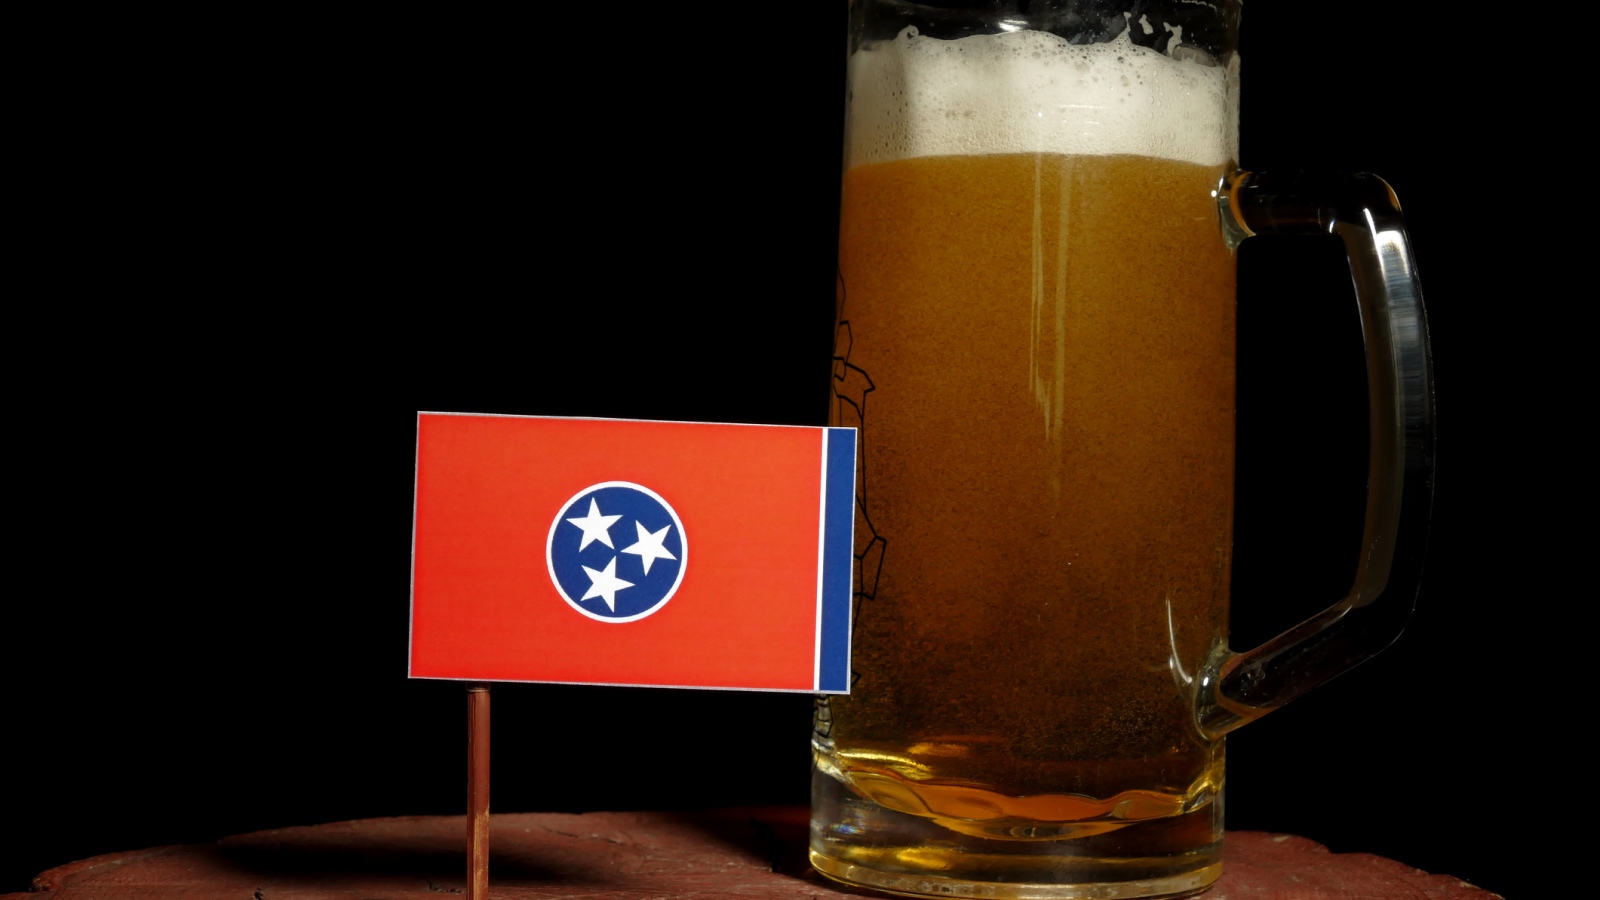 Tennessee state flag next to beer mug